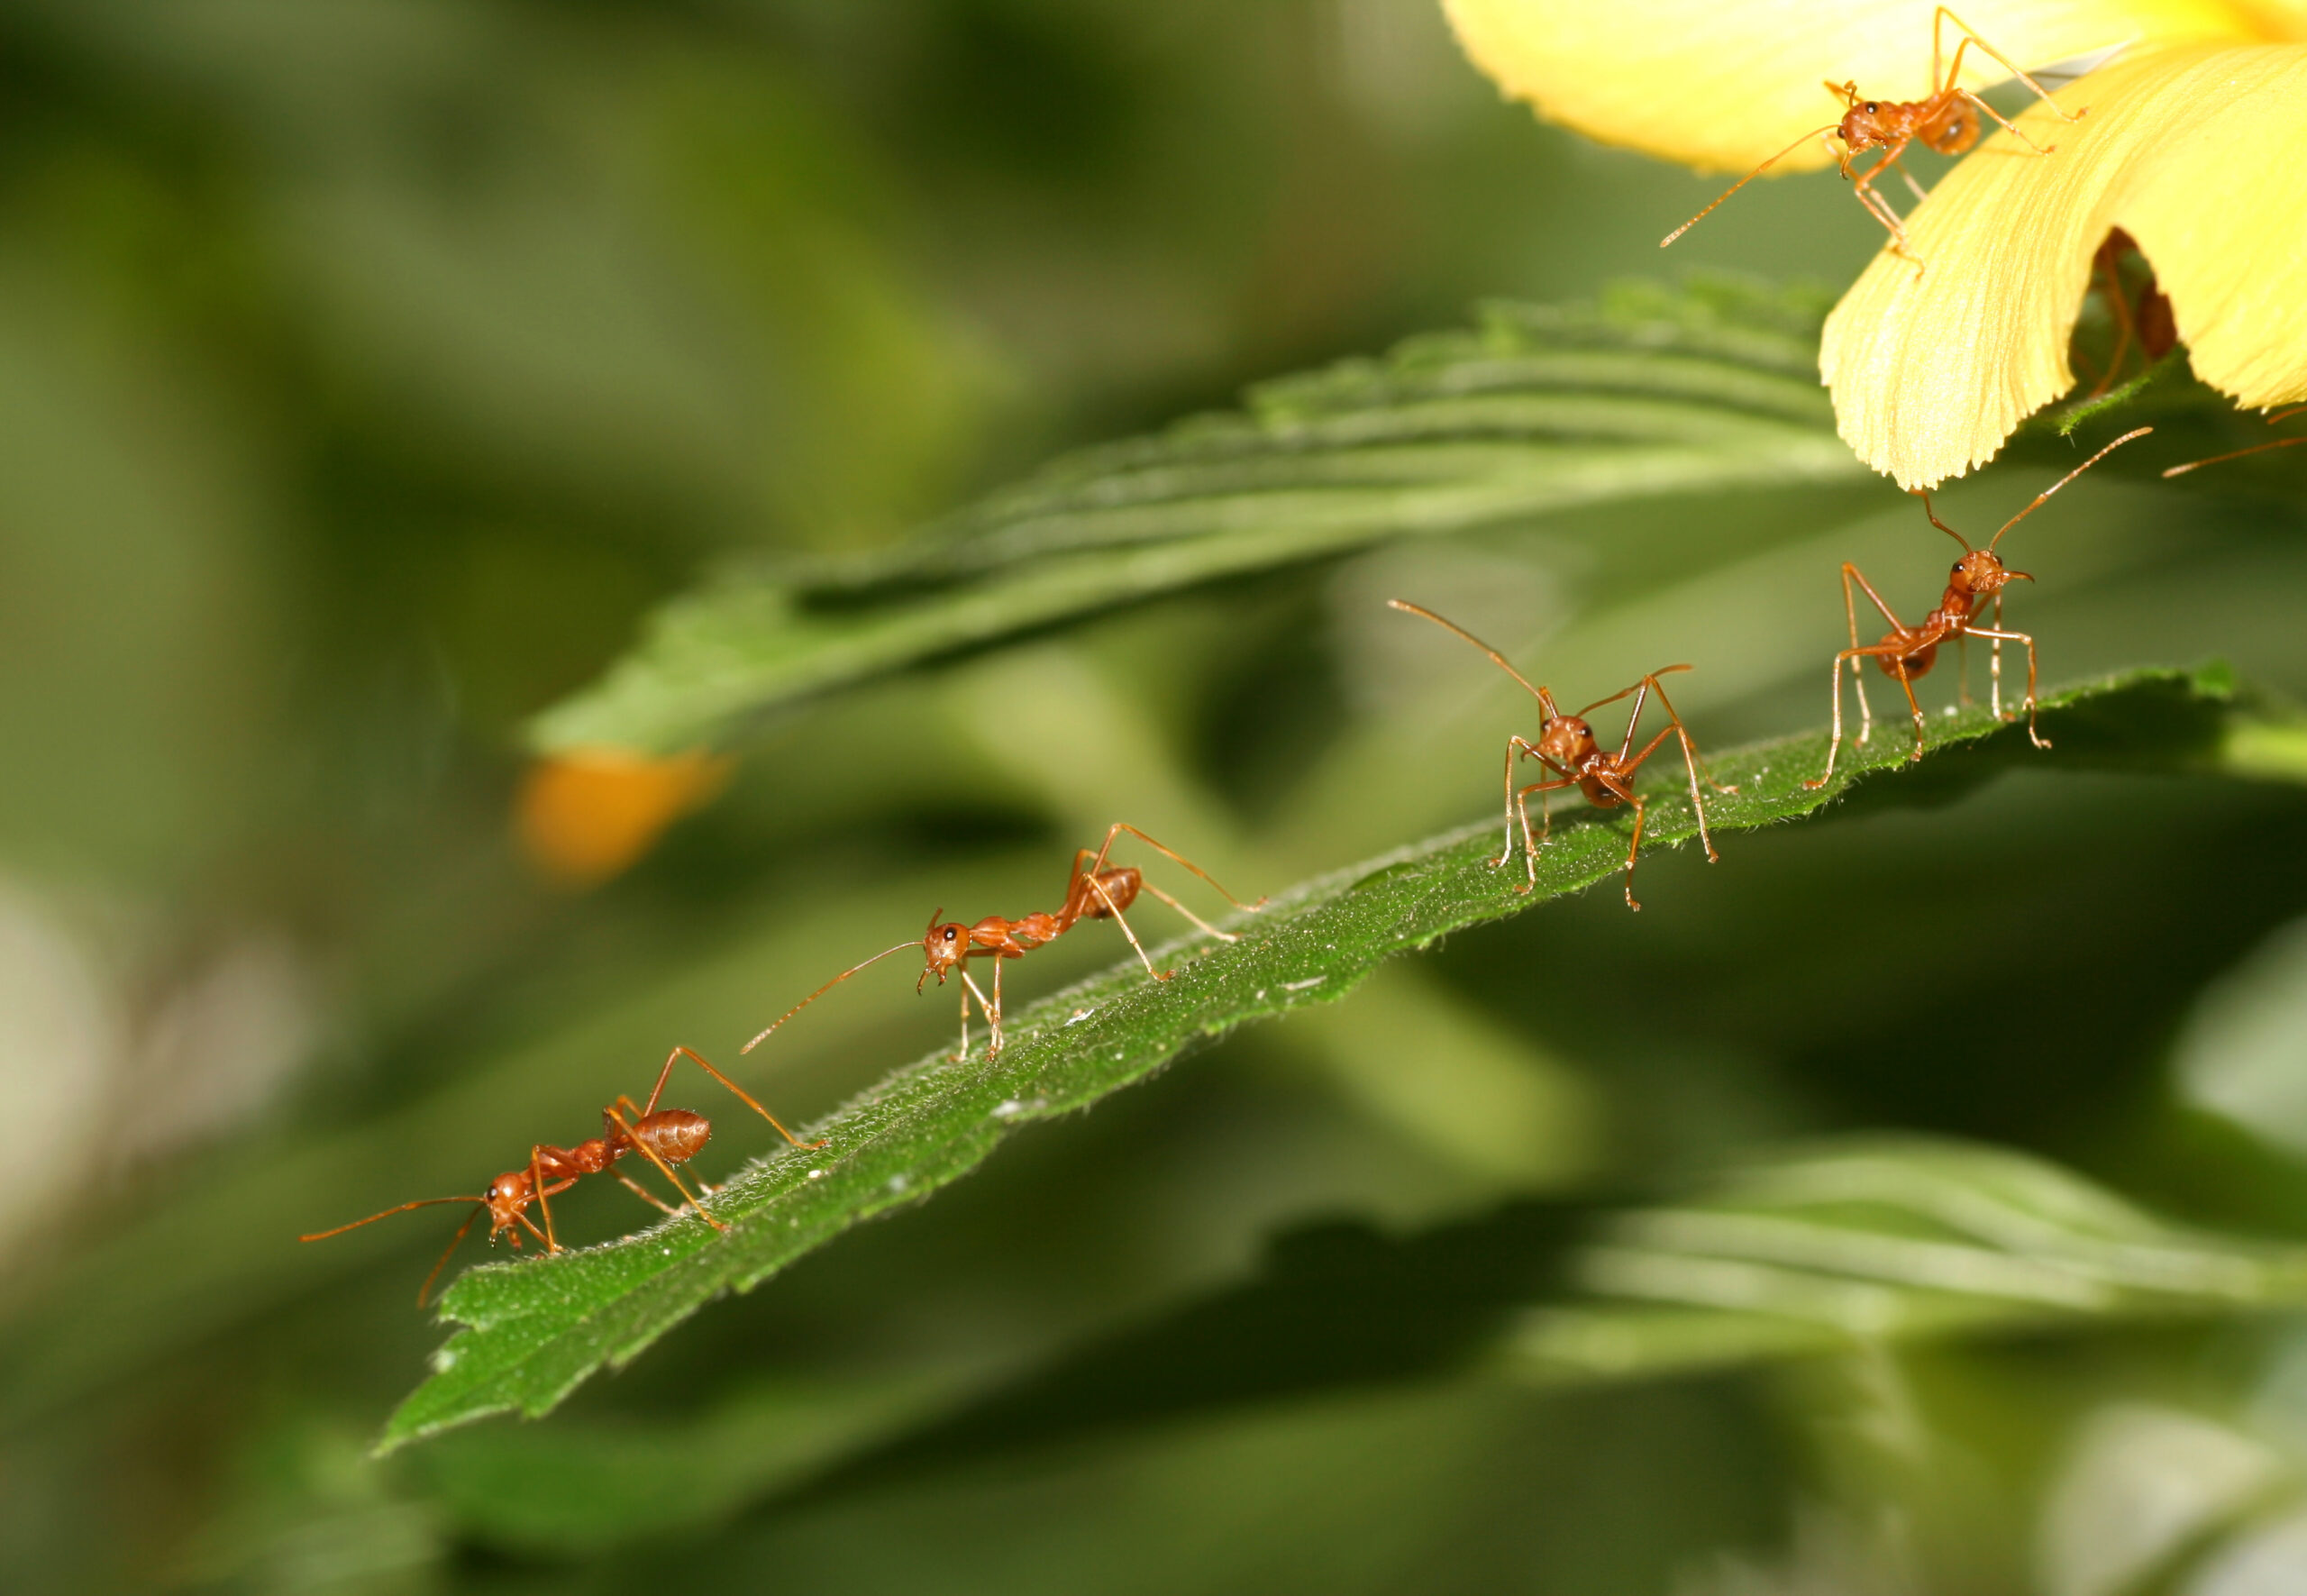 Ants as an example of system creation out of chaos